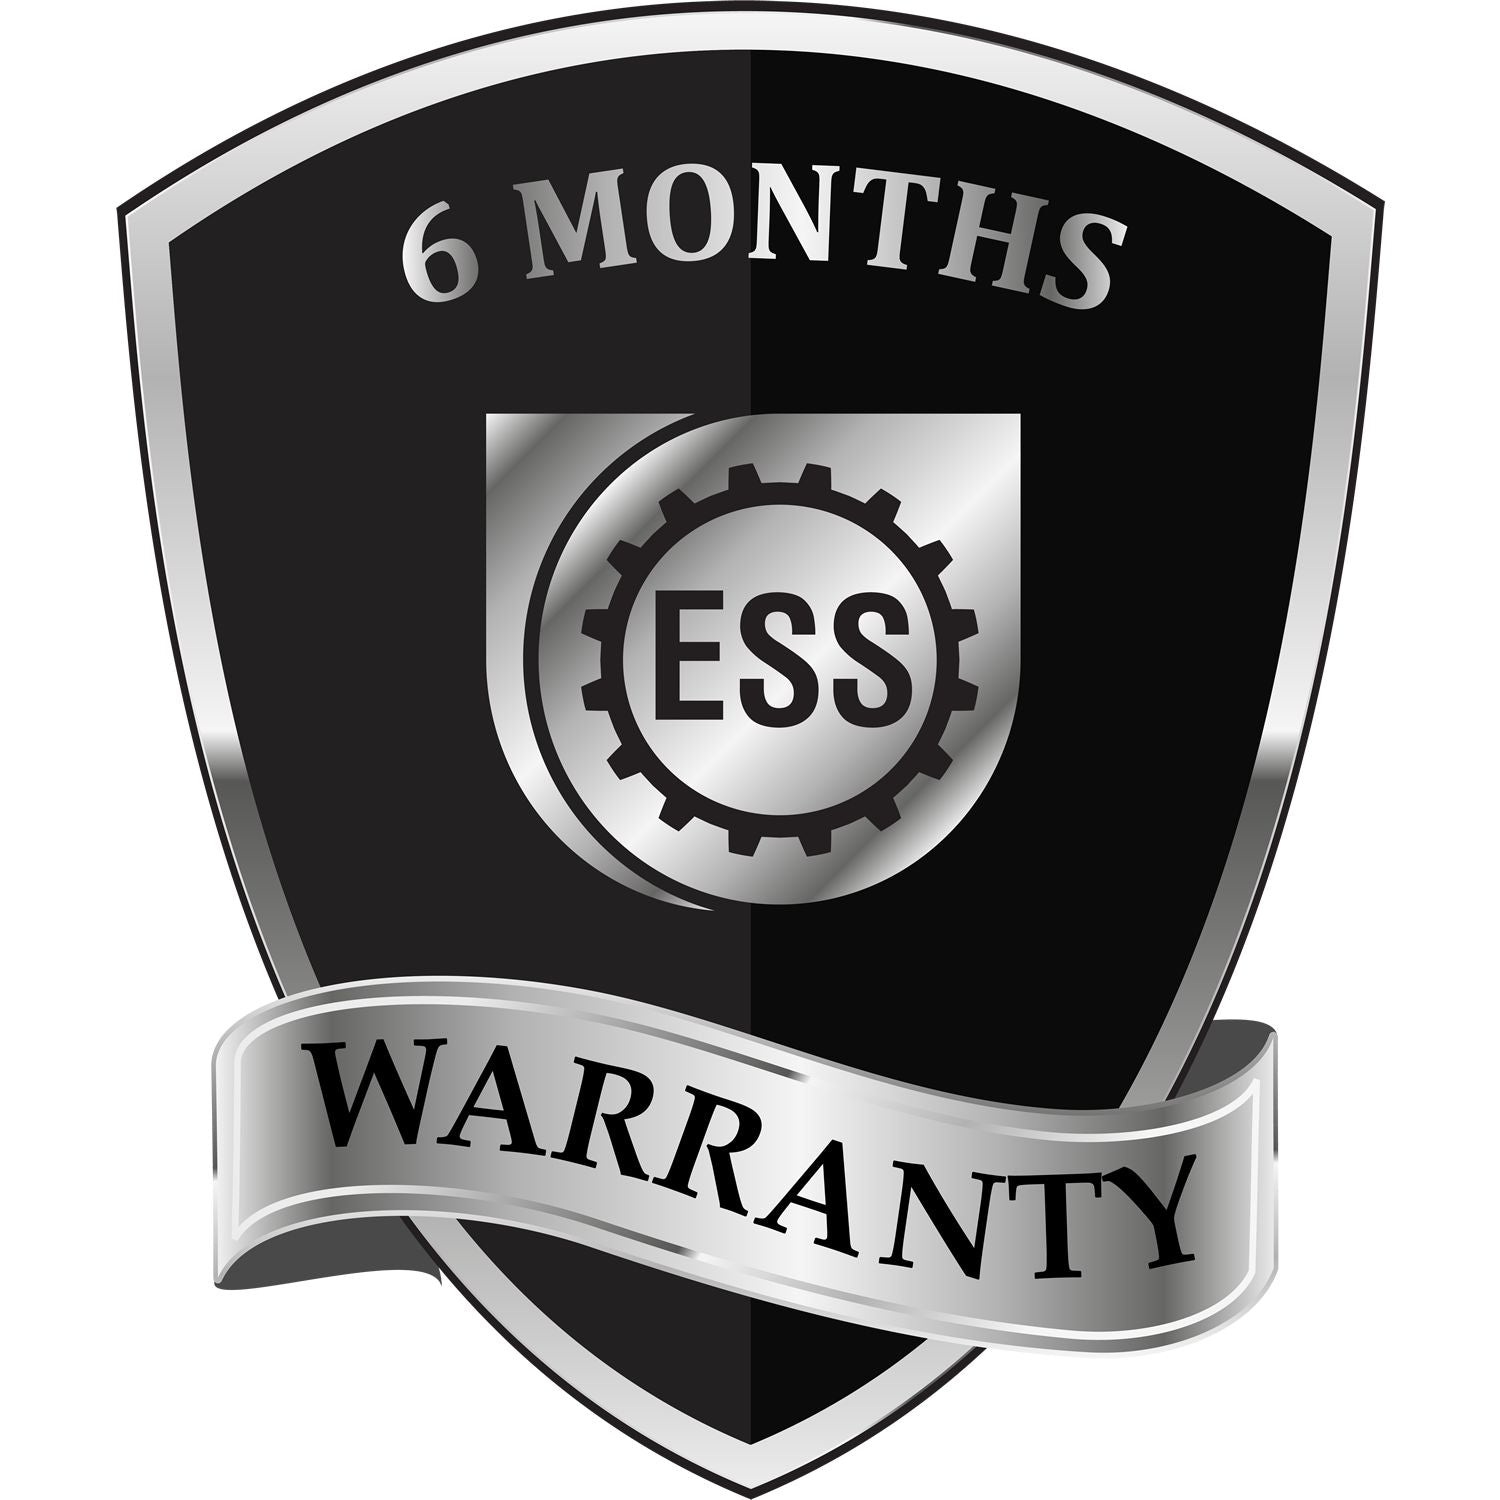 A badge or emblem showing a warranty icon for the South Dakota Professional Engineer Seal Stamp